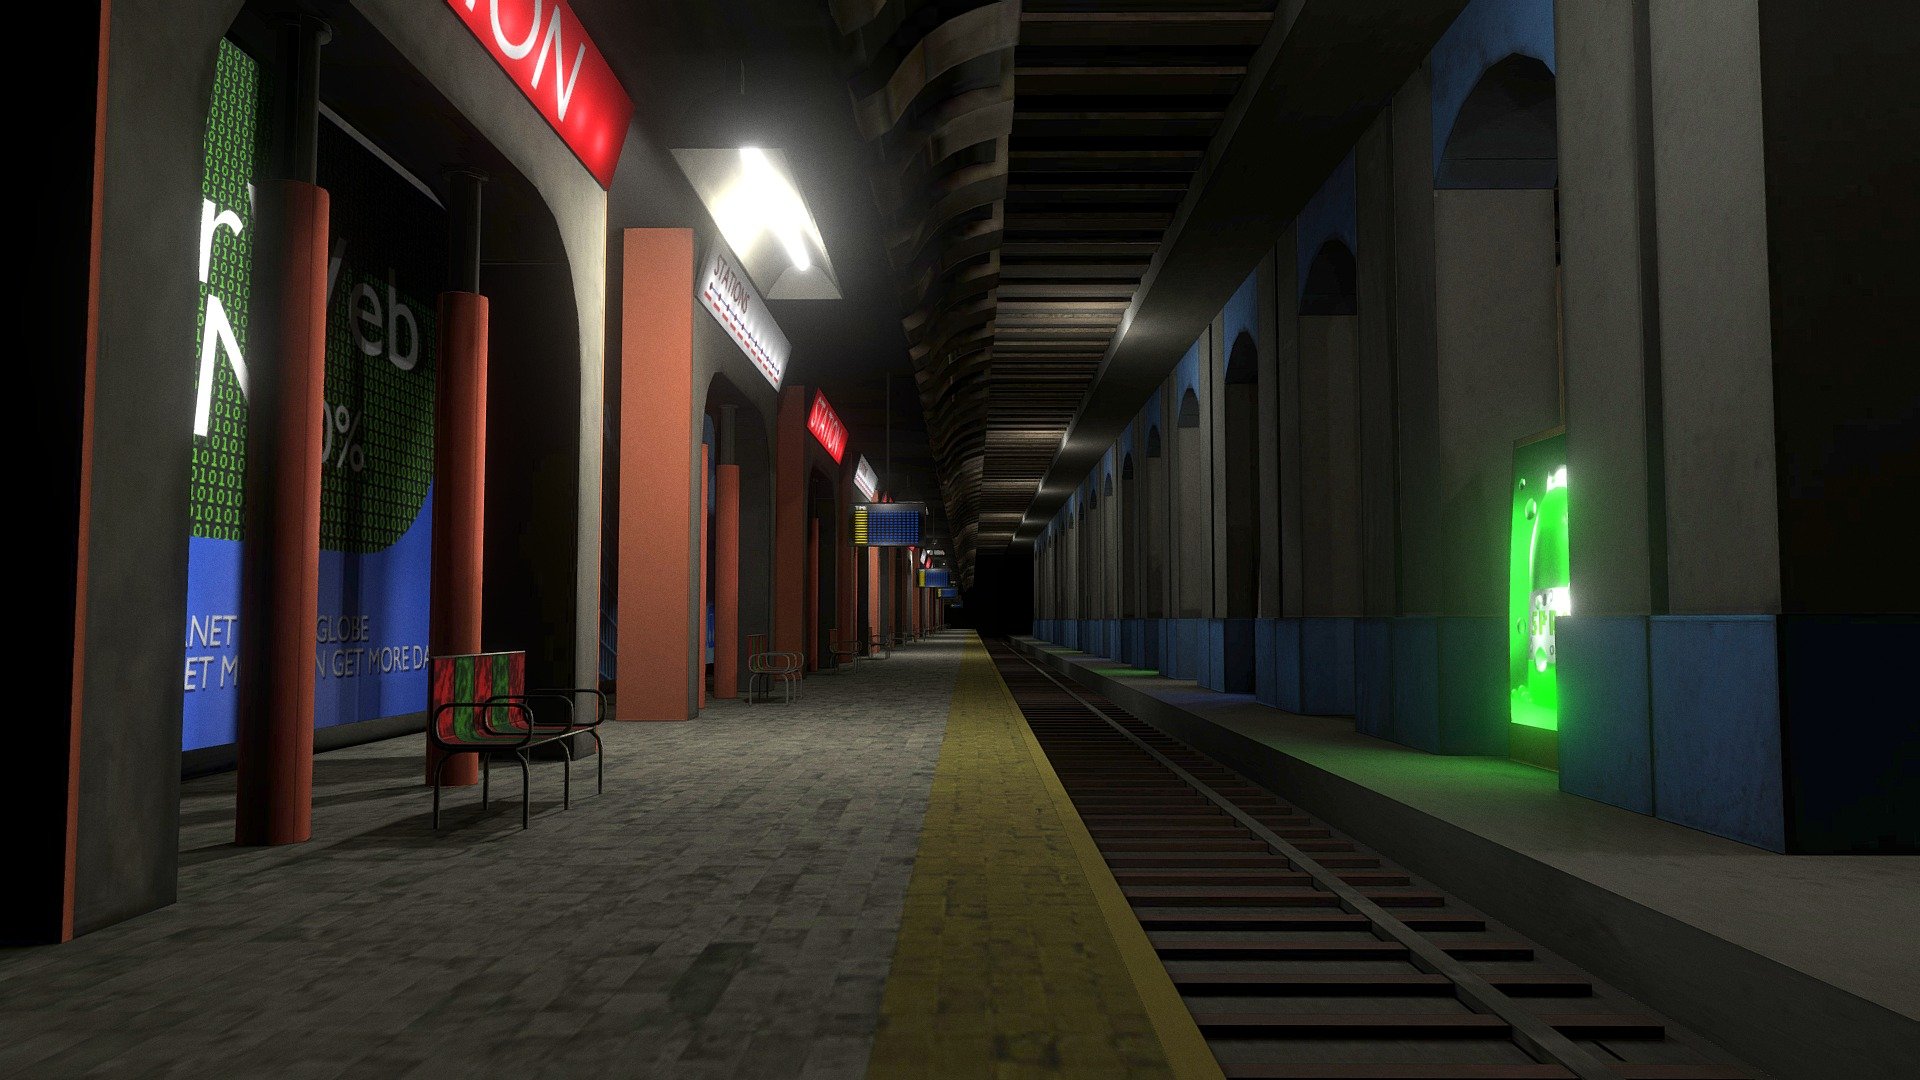 VR Metro Station modeled in Blender and textured in Substance Painter.

The scene has baked in textures 3d model